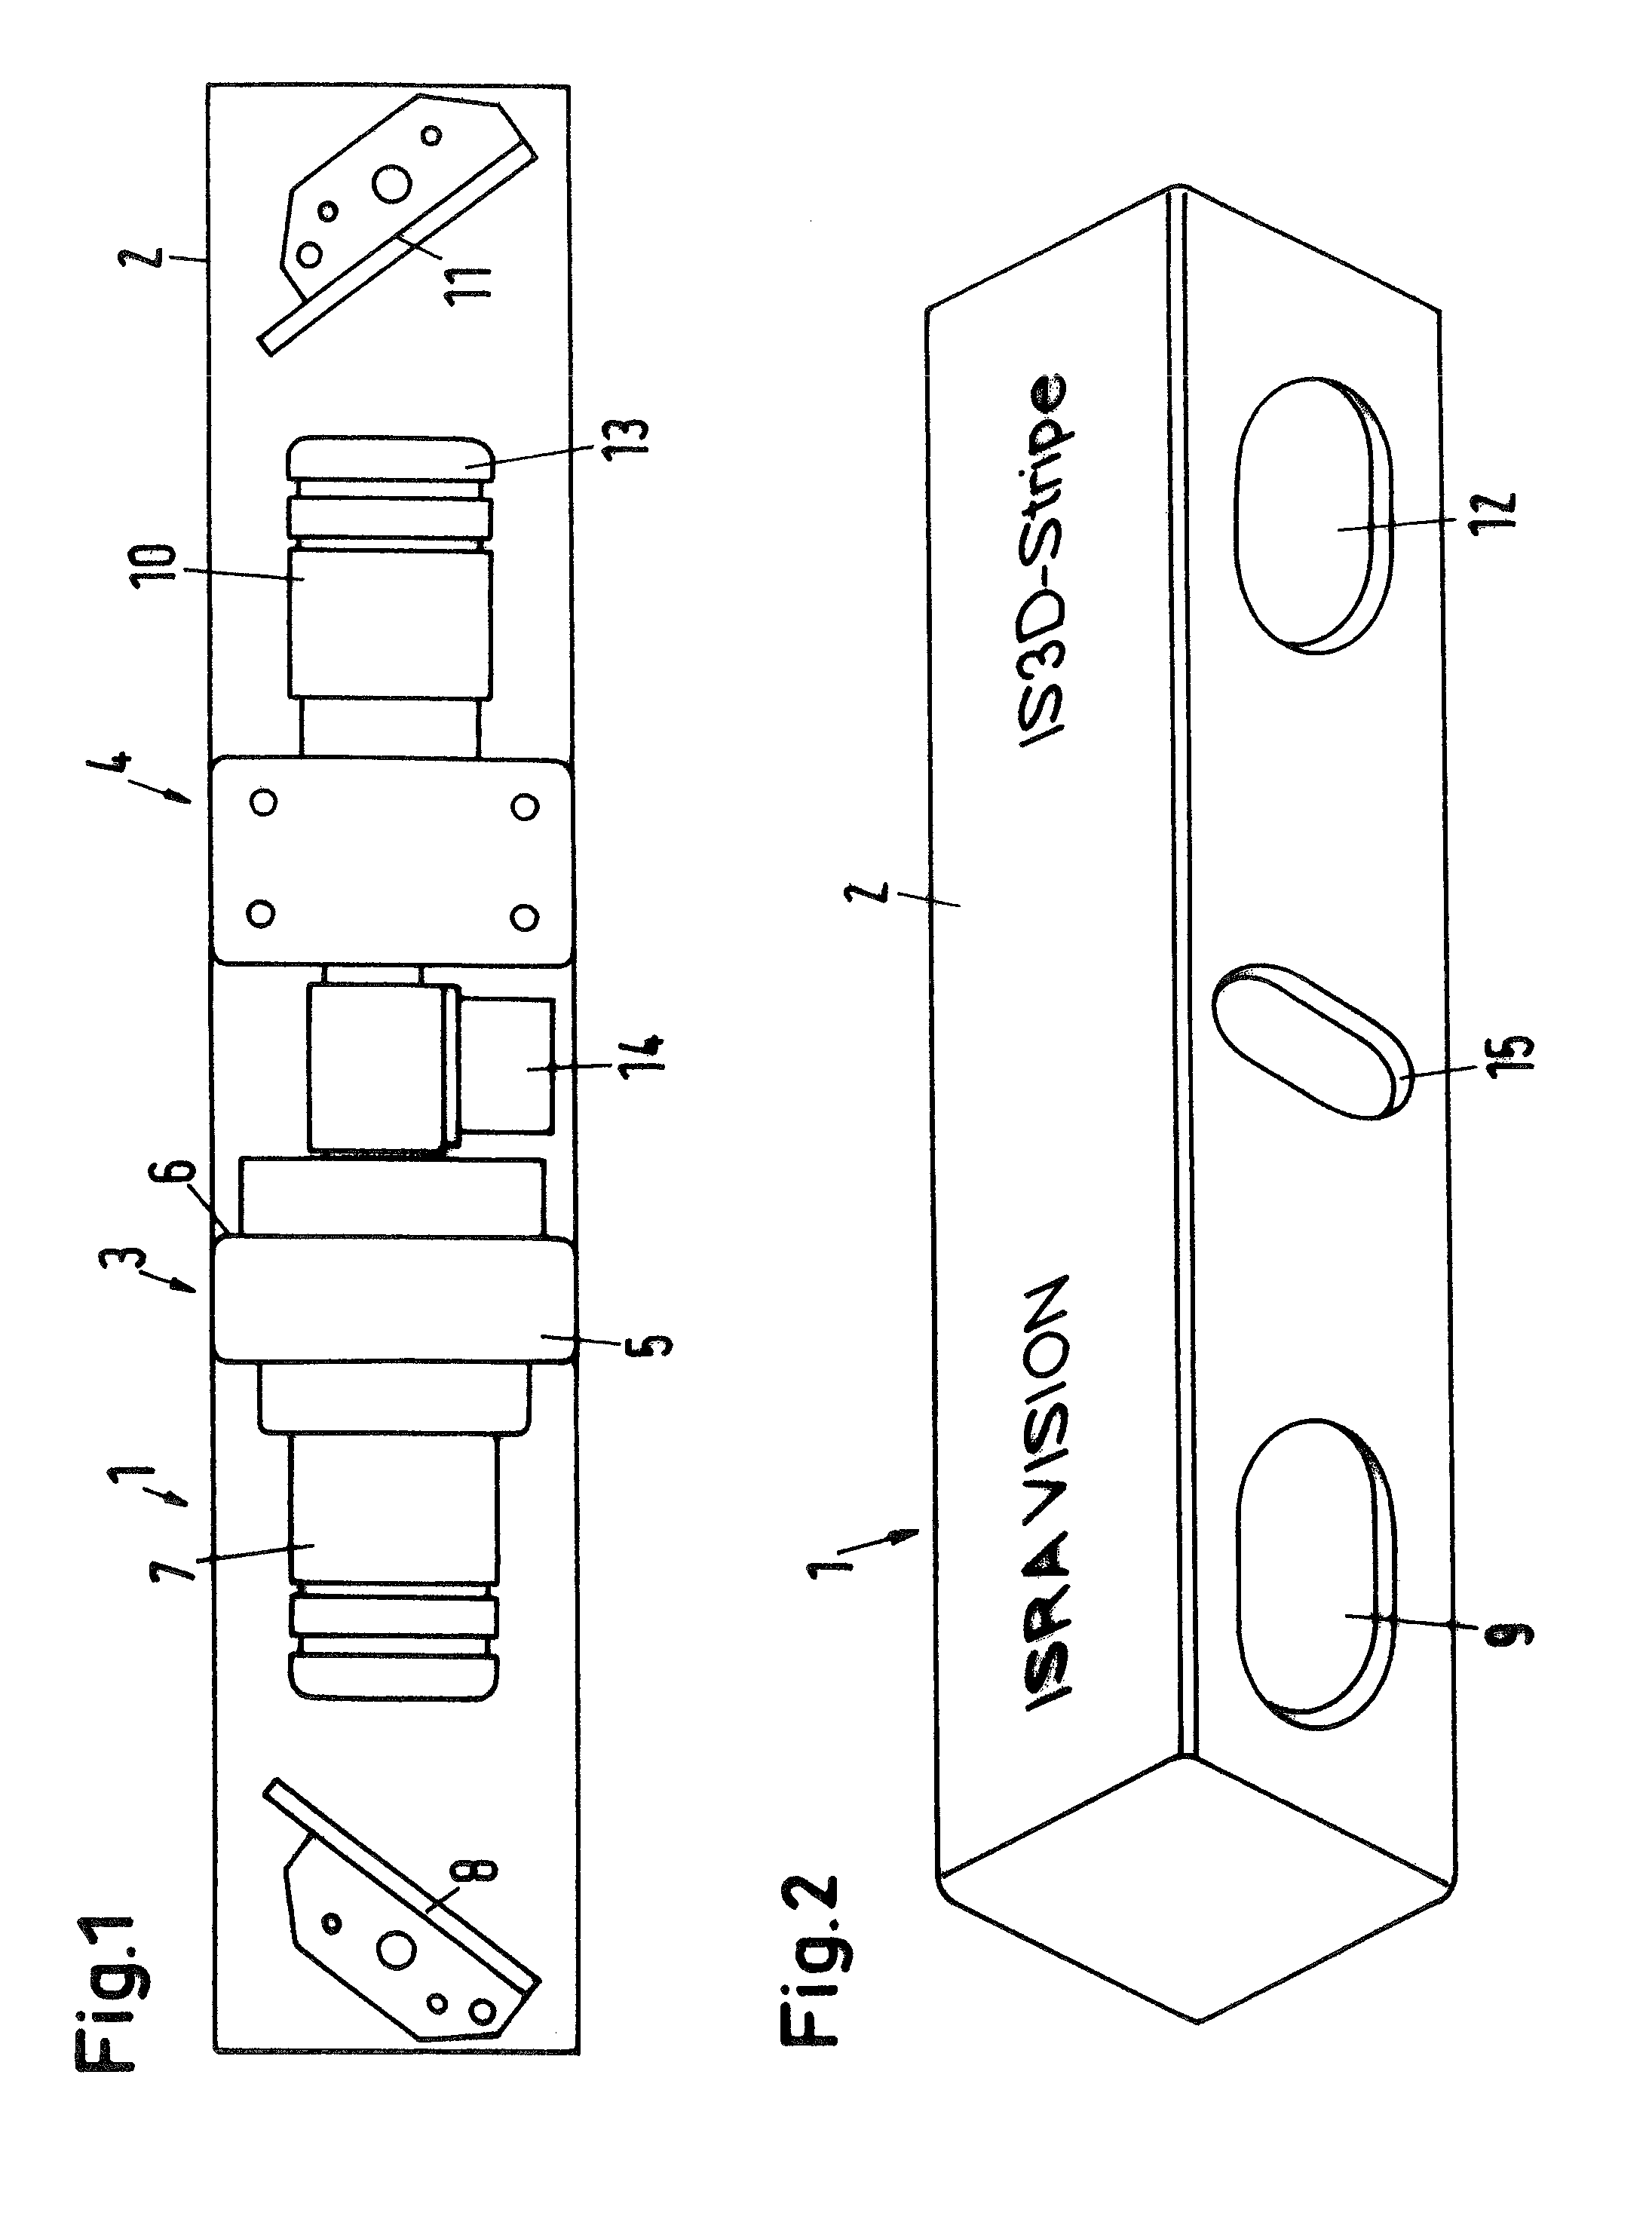 Sensor for measuring the surface of an object